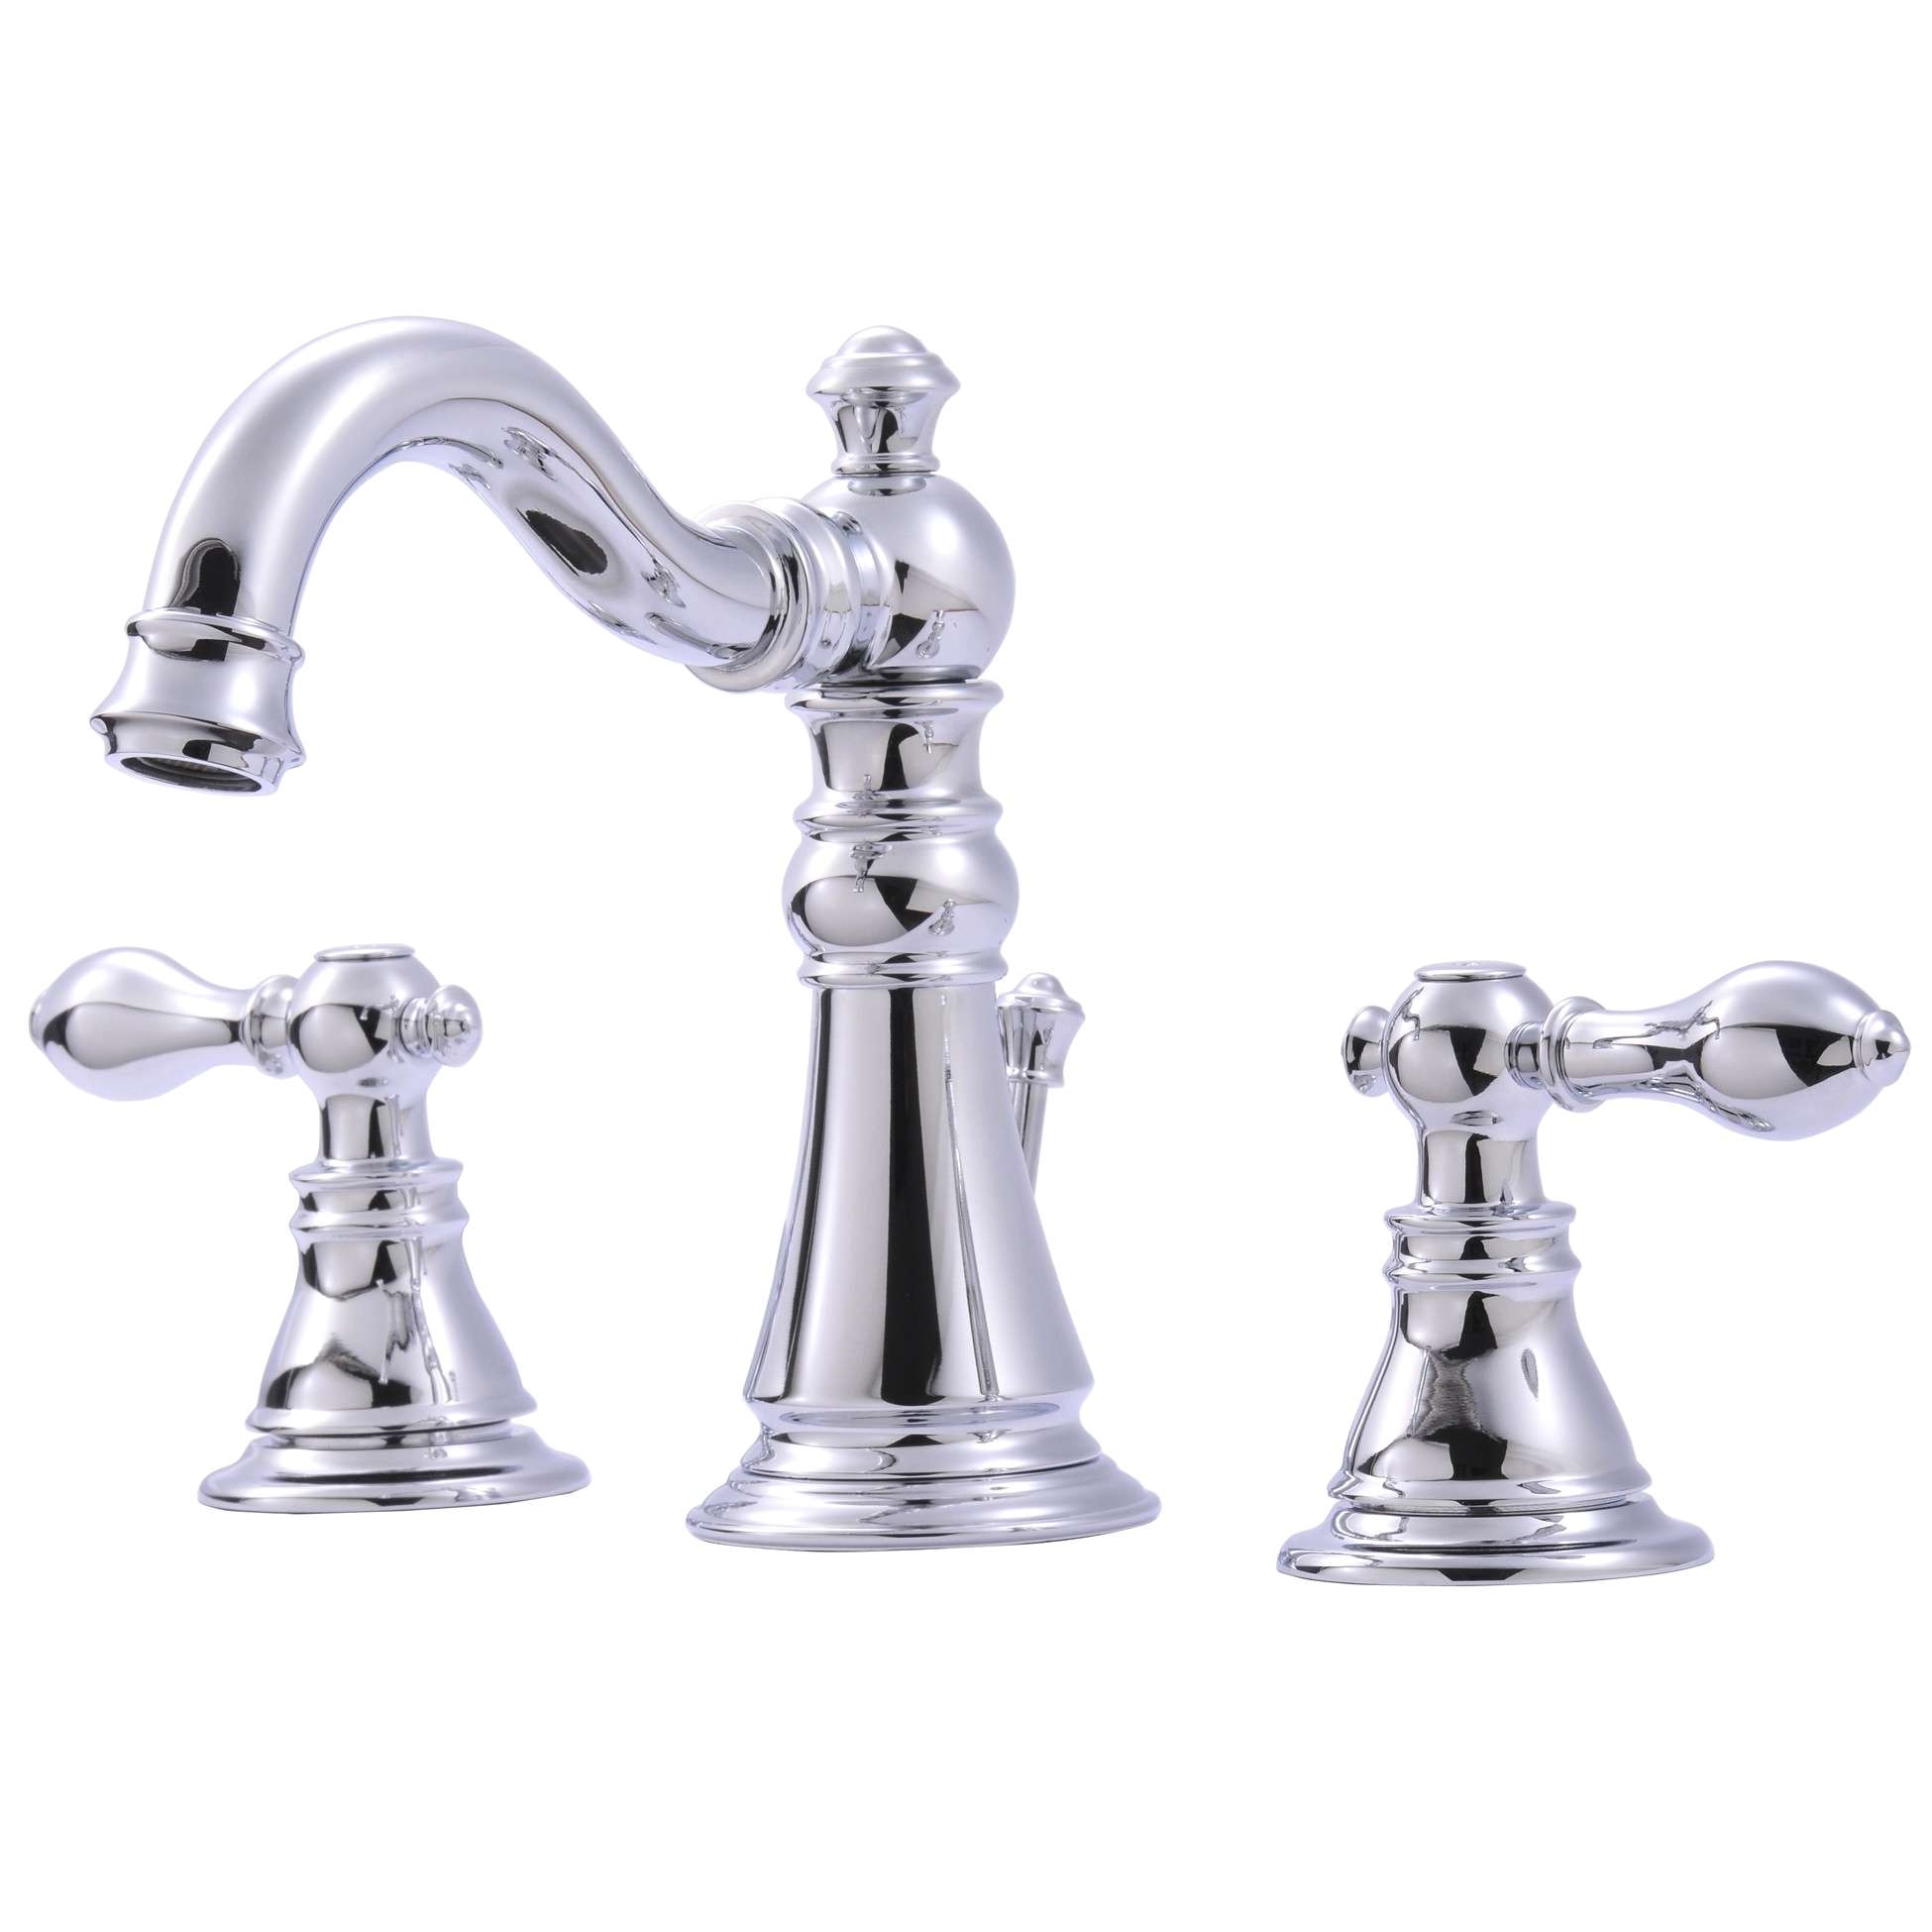 tub and shower replacement luxury lovely bathtub faucet leaks h sink bathroom faucets repair i 0d